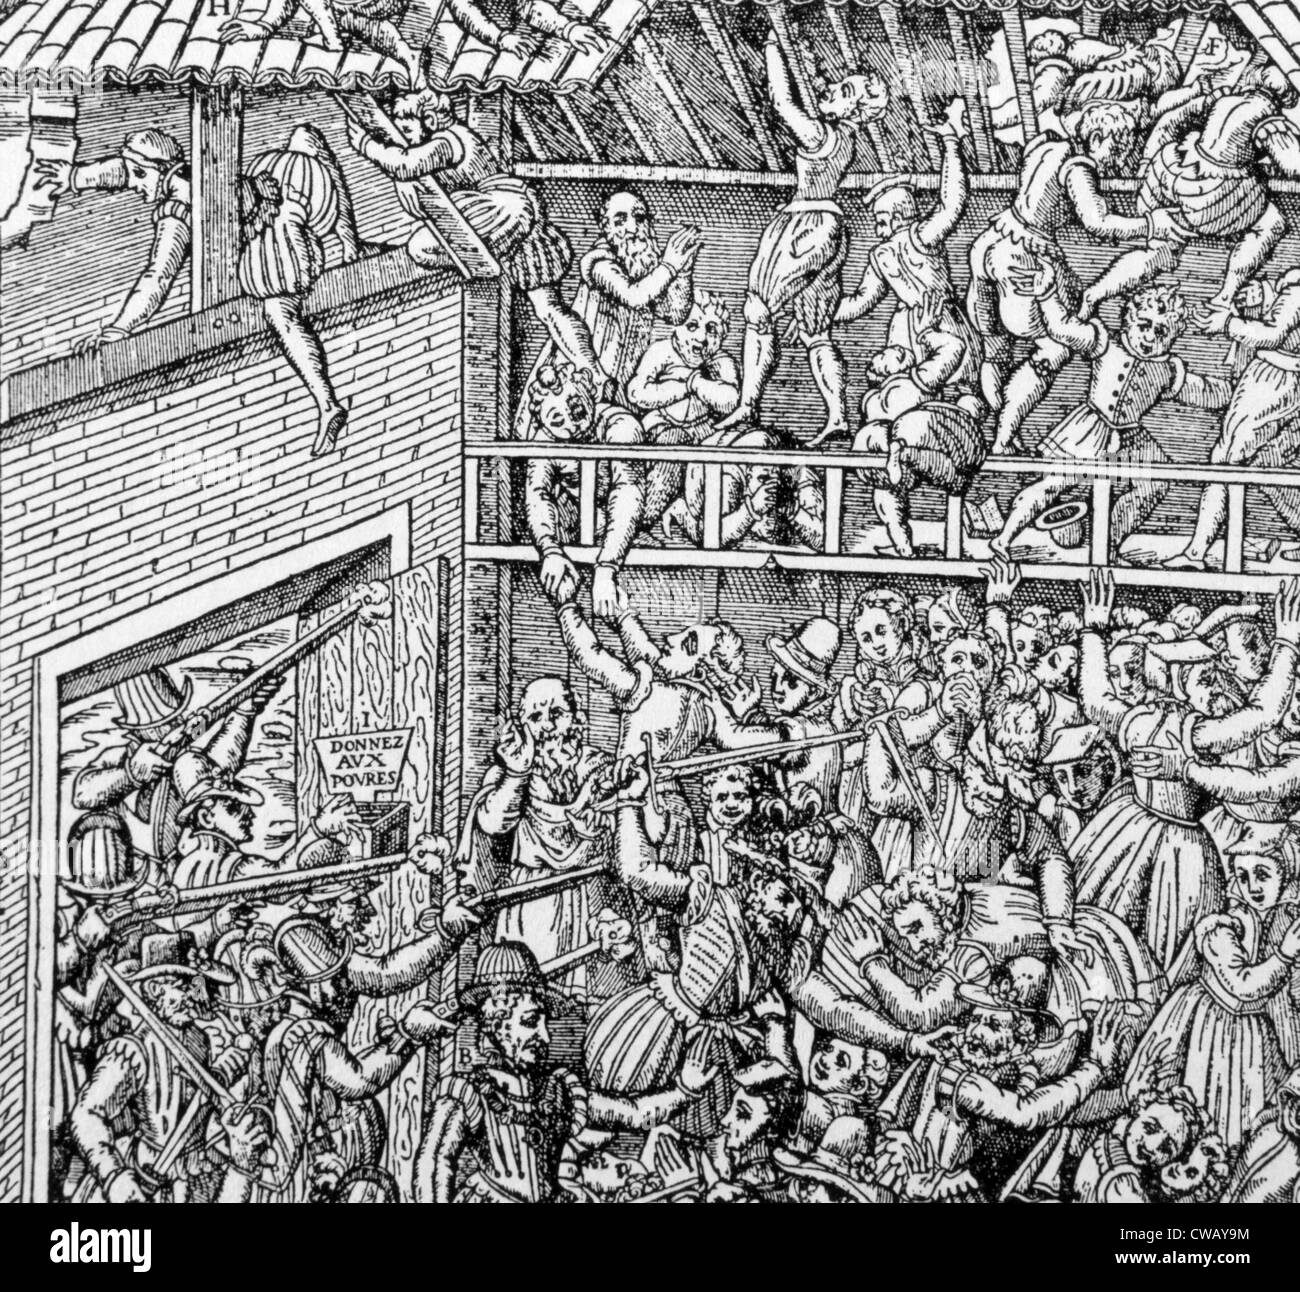 Massacre of a Huguenot congregation in a barn by the Duc de Guise and his men, Vassy, France, 1562. Stock Photo